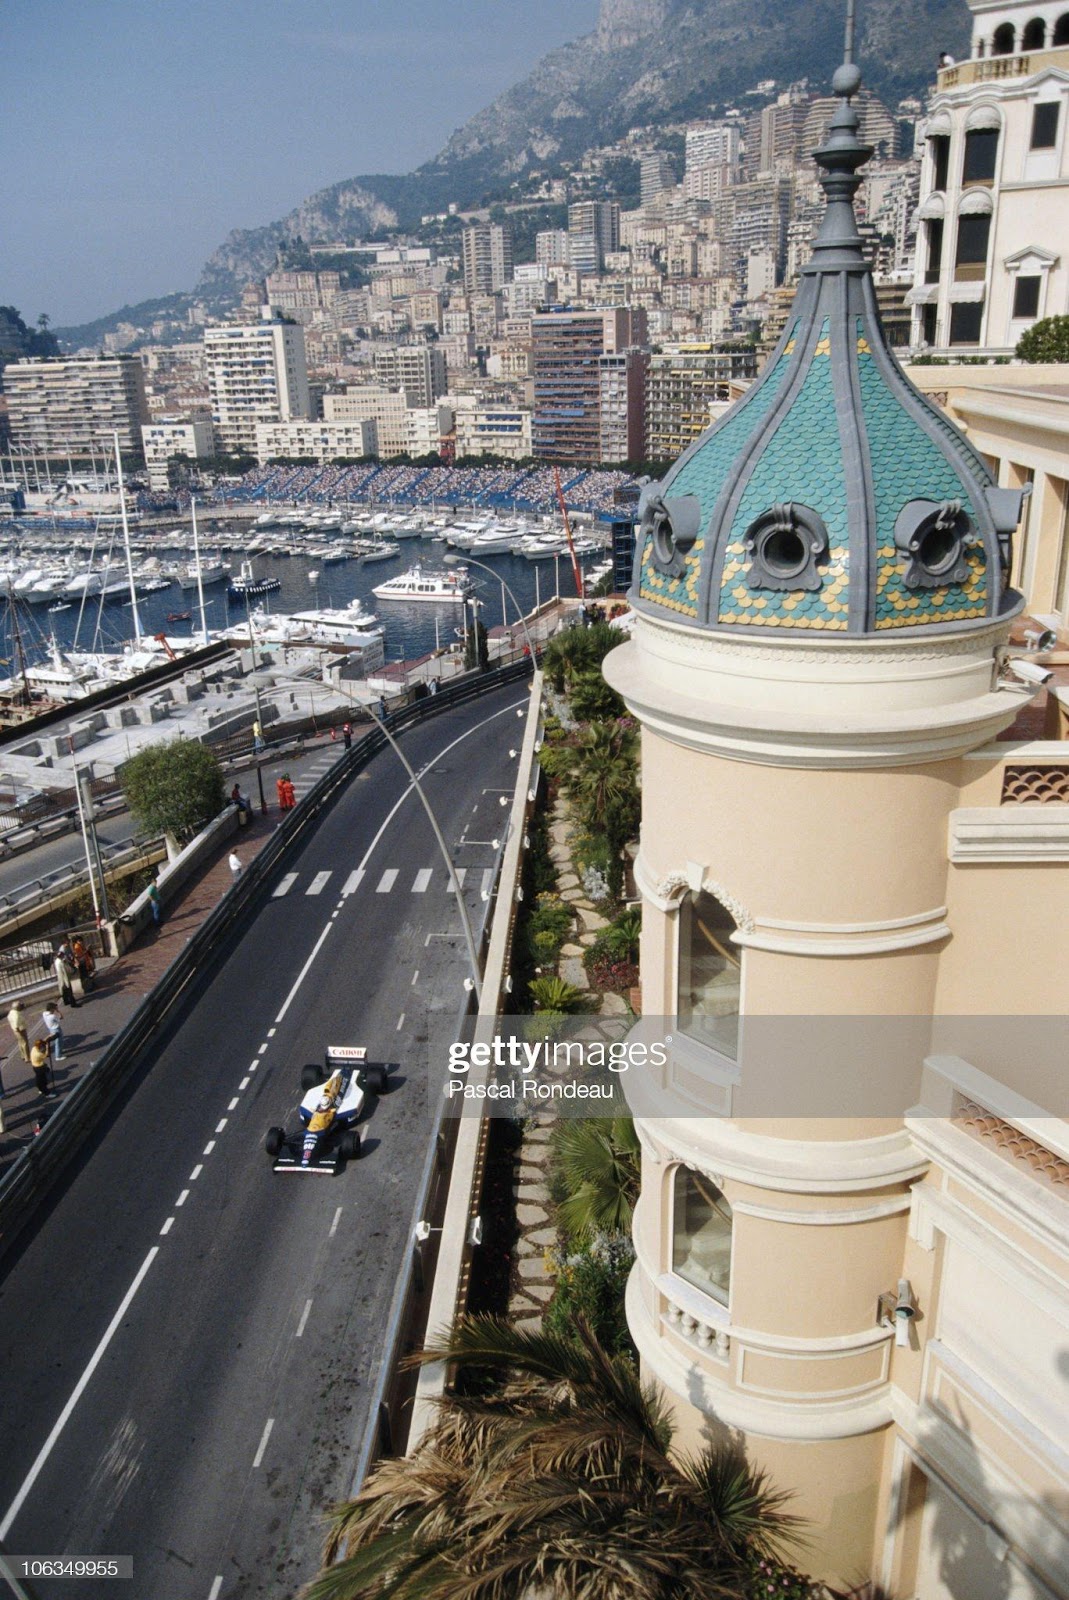 Nigel Mansell drives the n.5 Canon Williams Renault Williams FW14B Renault 3.5 V10 during the Grand Prix of Monaco on 31st May 1992 on the streets of the Principality of Monaco in Monte Carlo, Monaco.